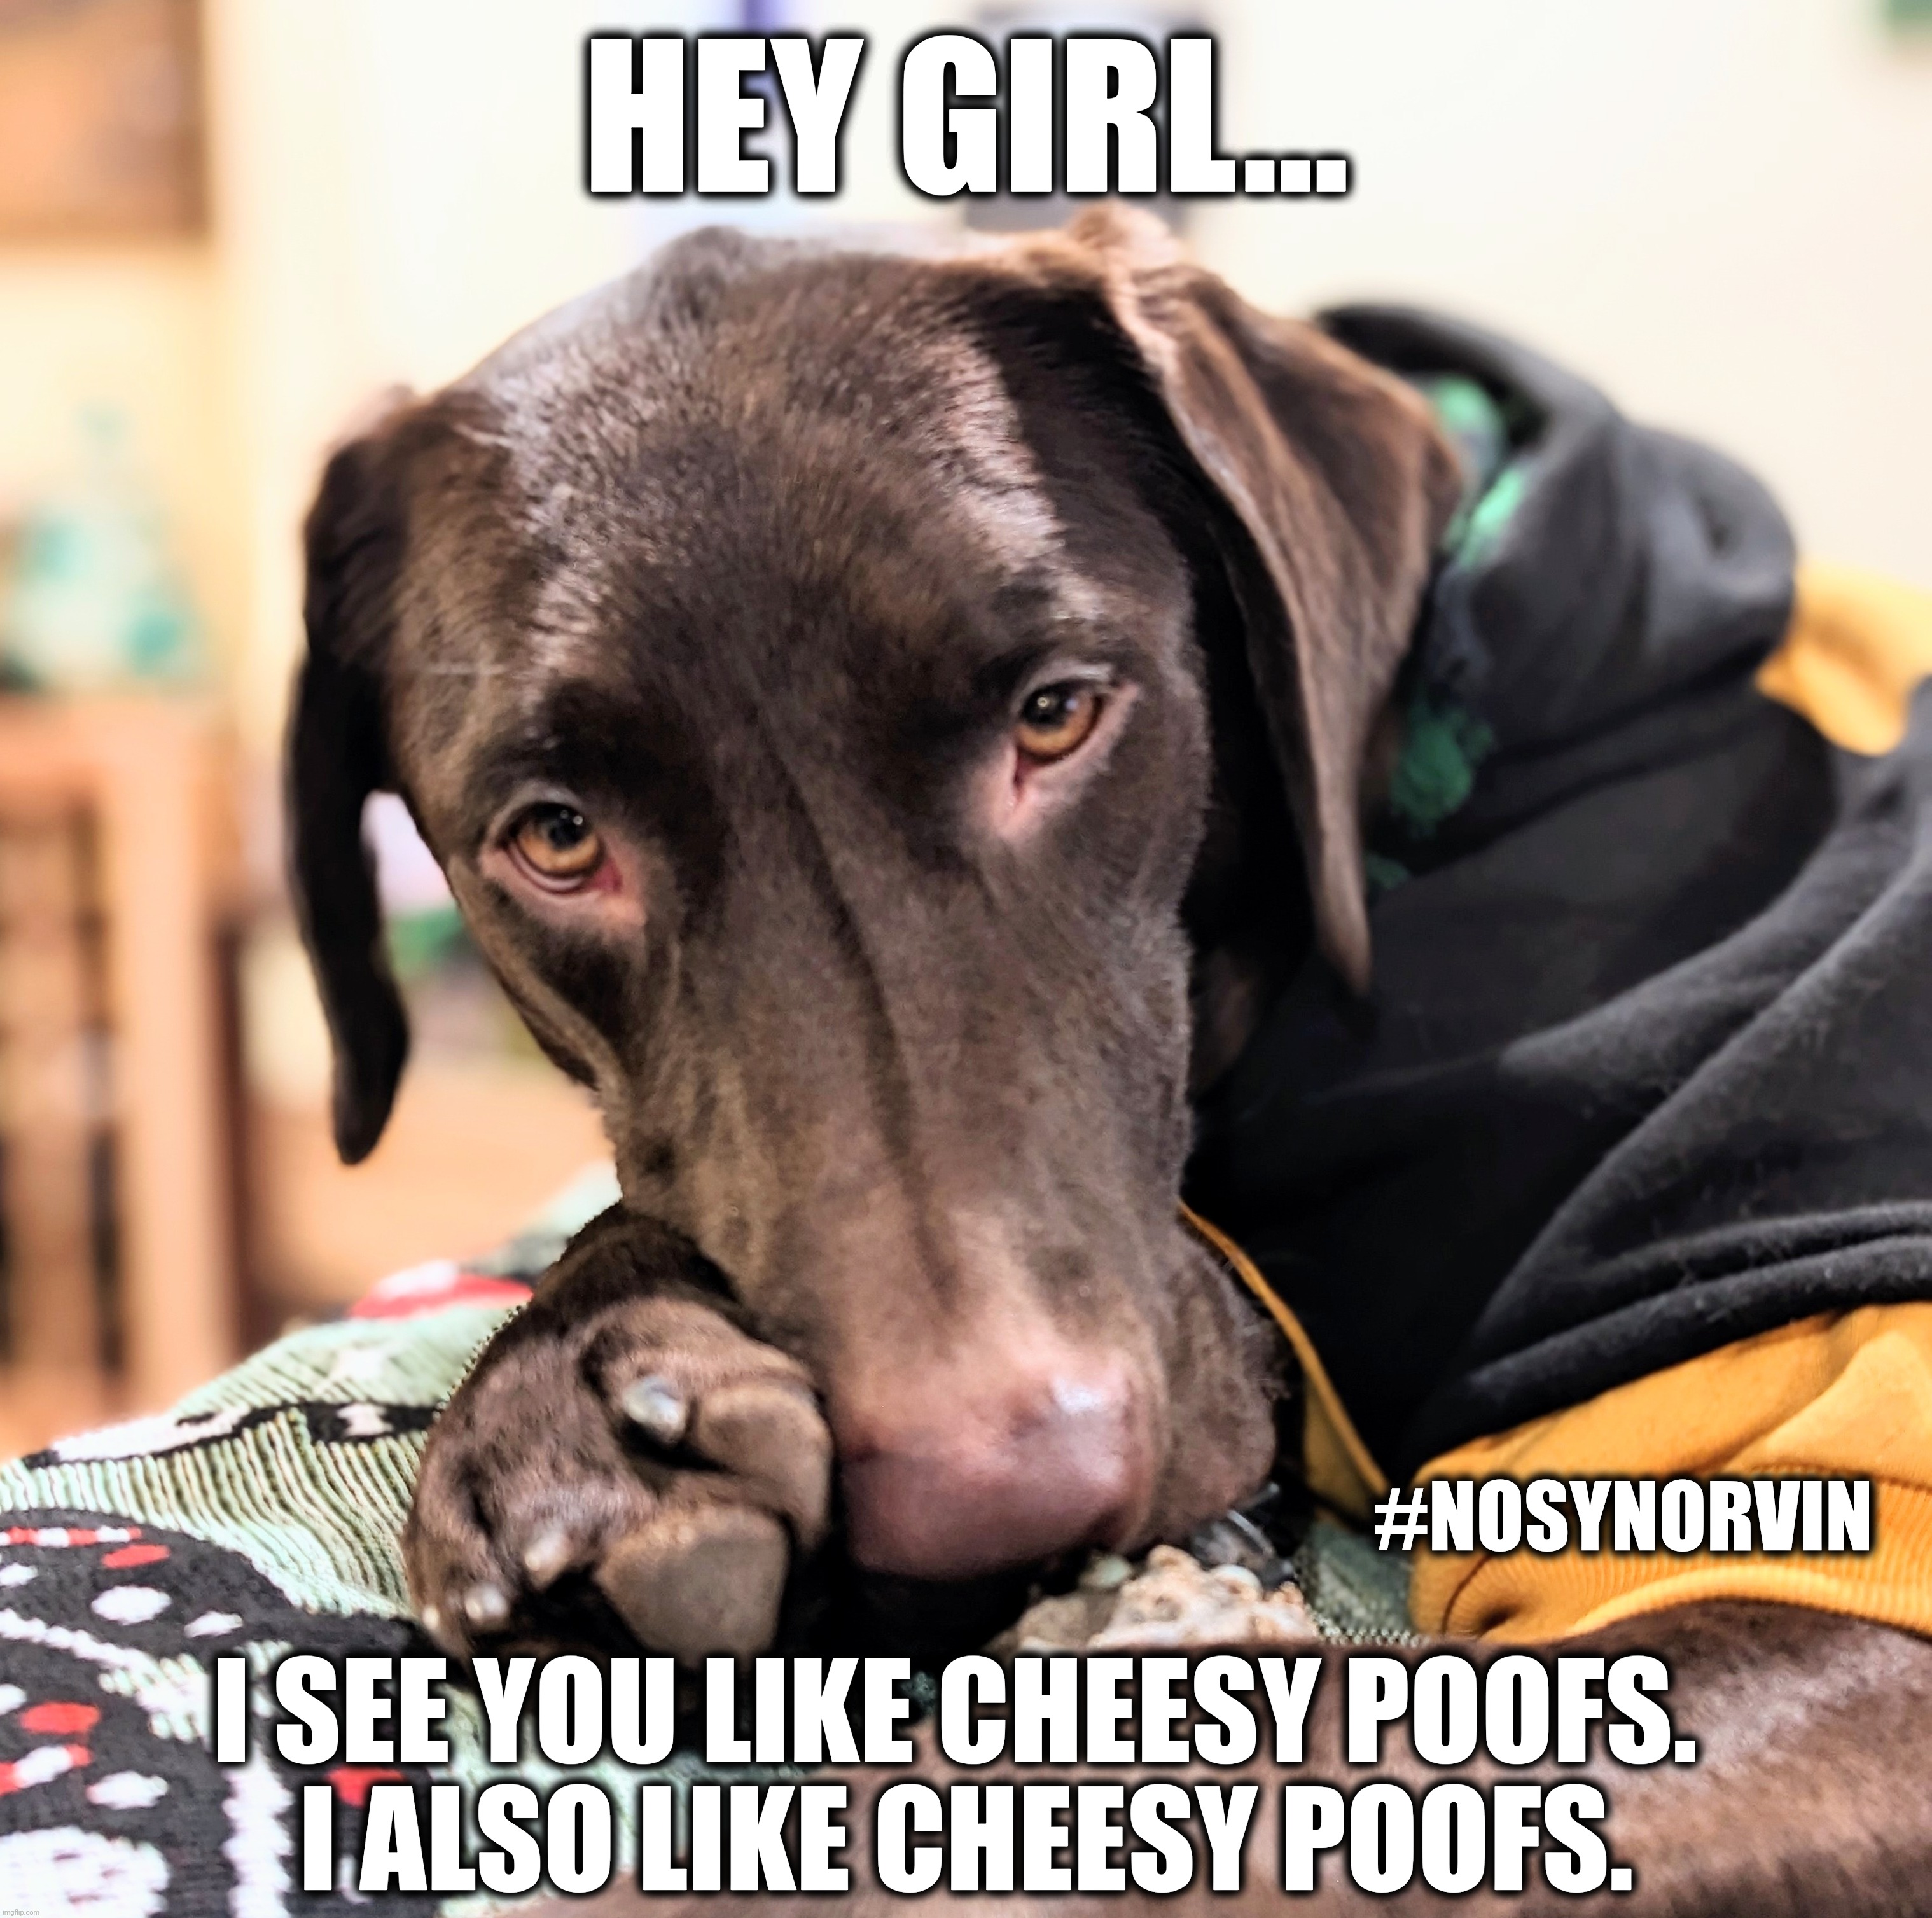 Hey Girl... | HEY GIRL... #NOSYNORVIN; I SEE YOU LIKE CHEESY POOFS. 
I ALSO LIKE CHEESY POOFS. | image tagged in hey girl,dogs,funny dogs,memes,funny,nosy norvin | made w/ Imgflip meme maker